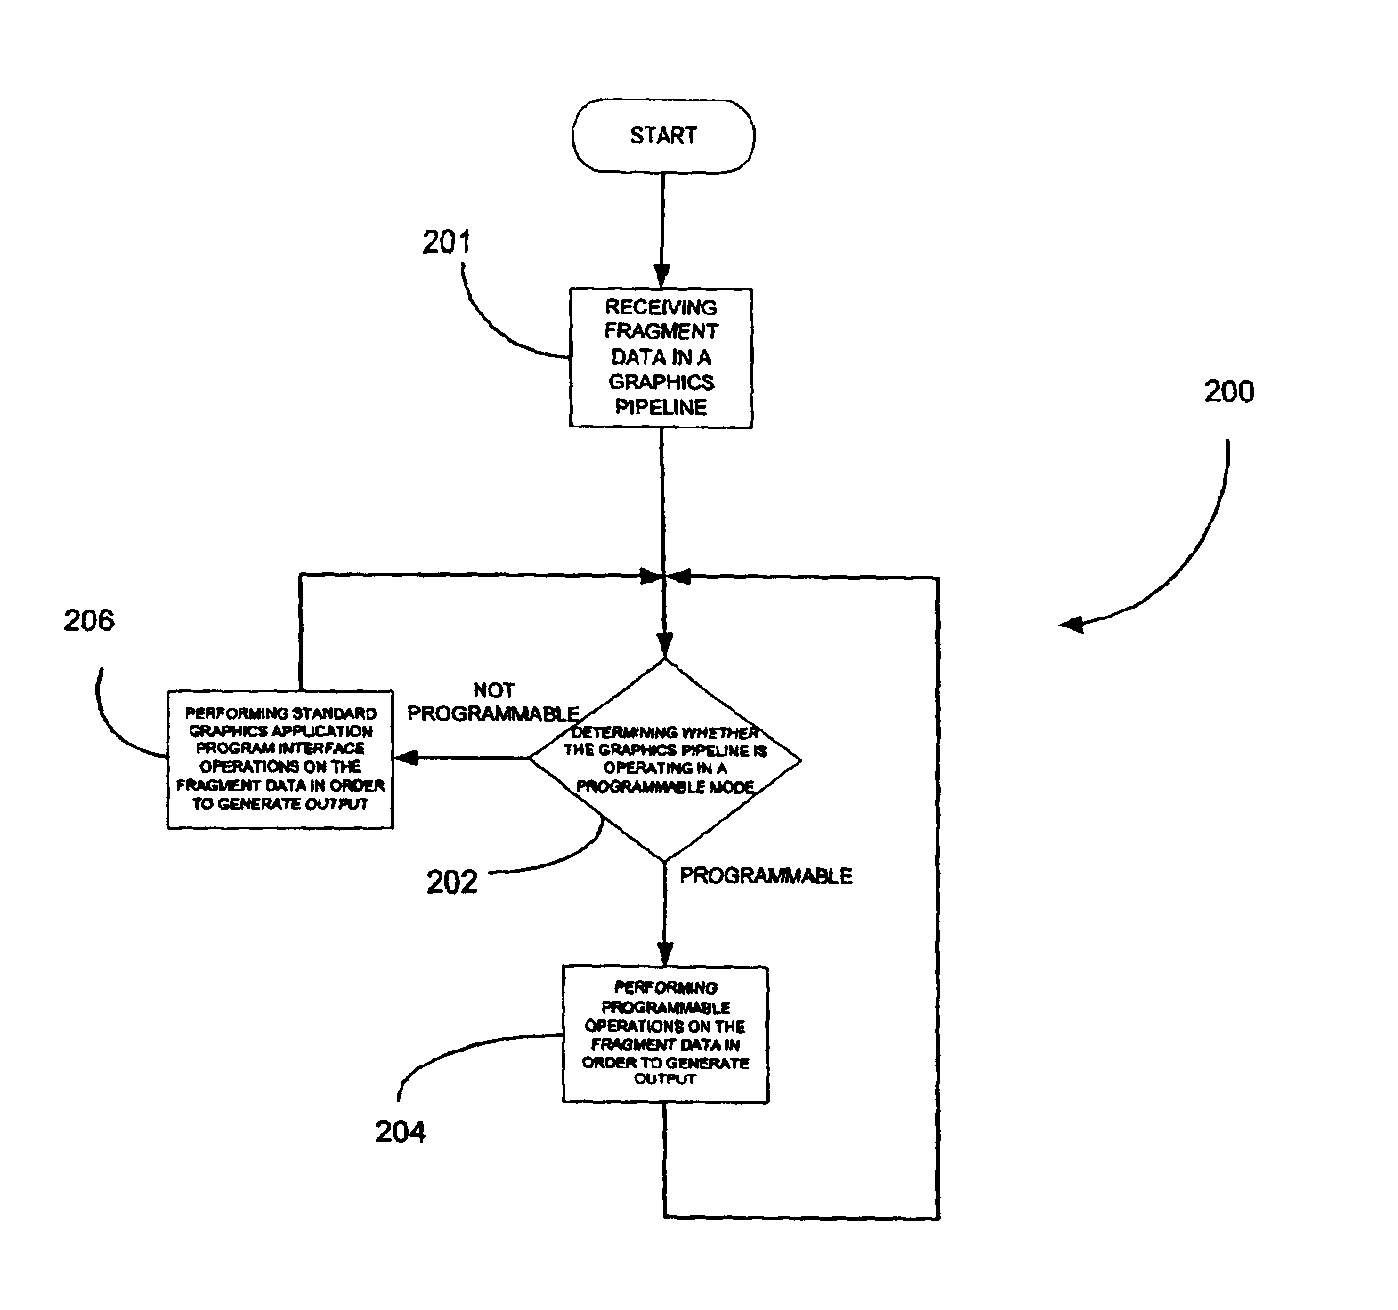 System, method and computer program product for programmable fragment processing in a graphics pipeline